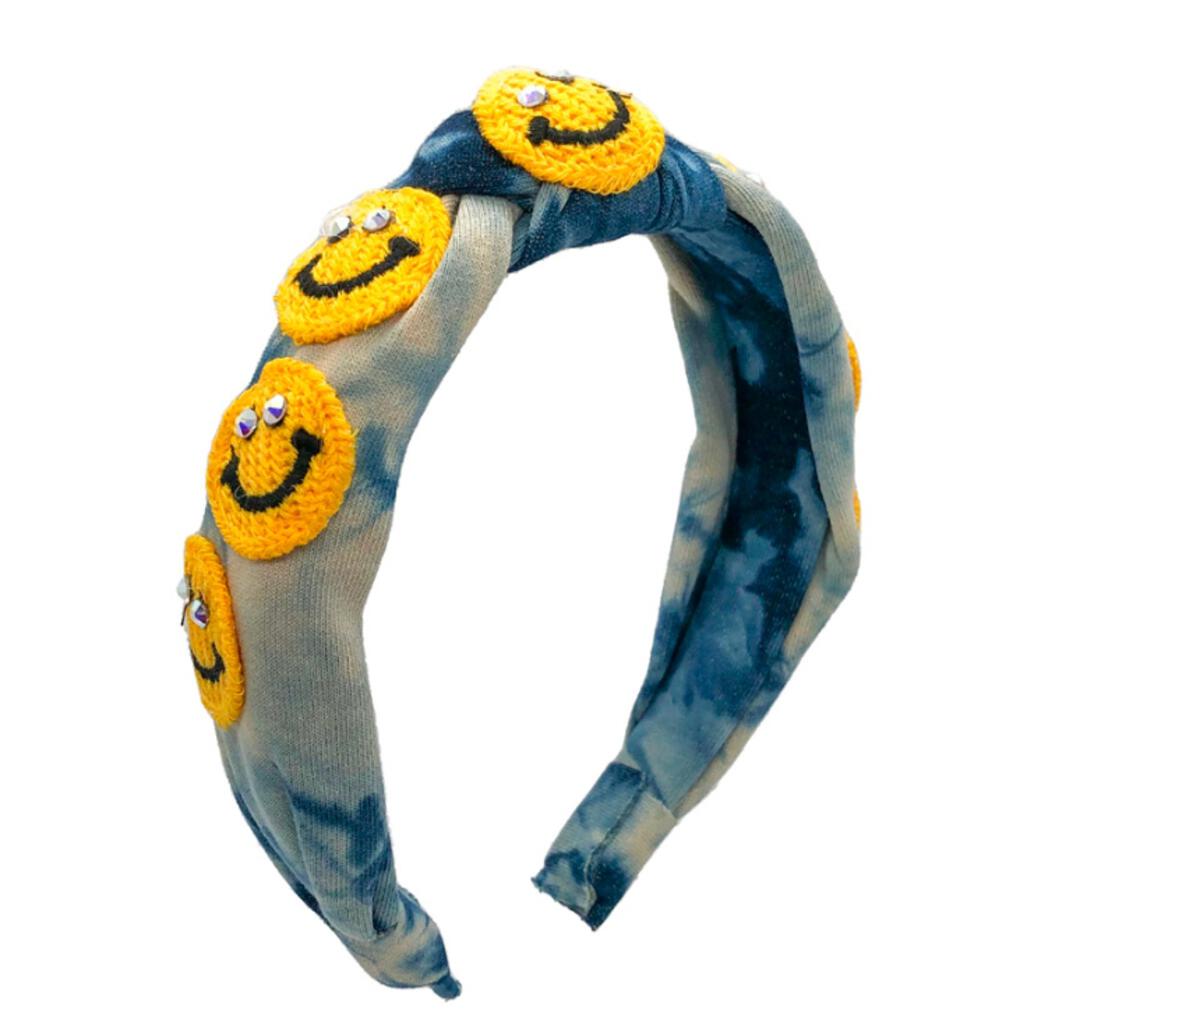 crystalized tie dye patched knot headband